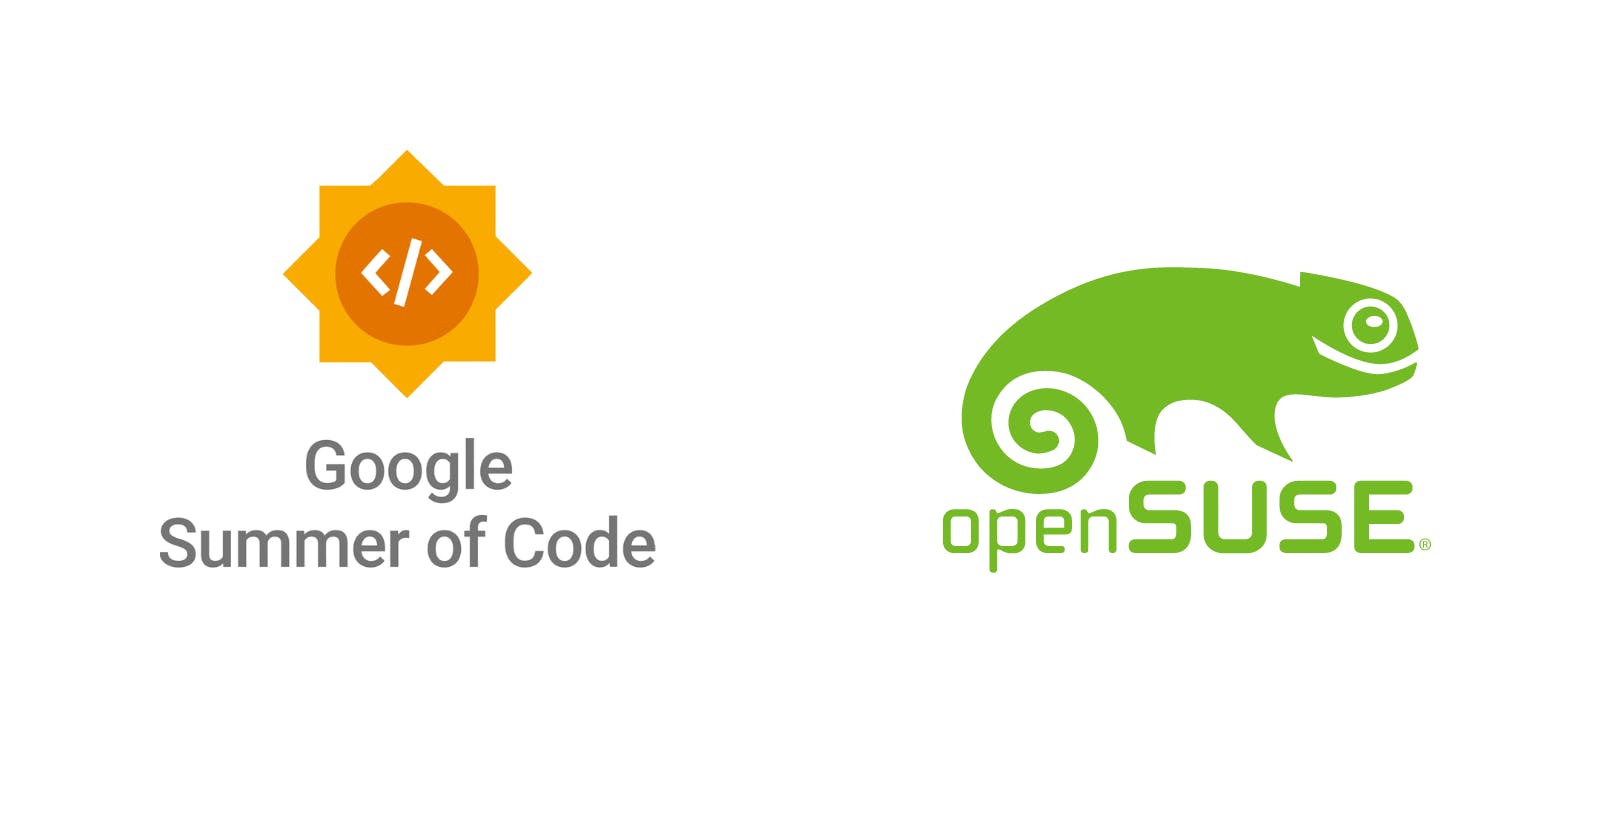 A new journey with openSUSE